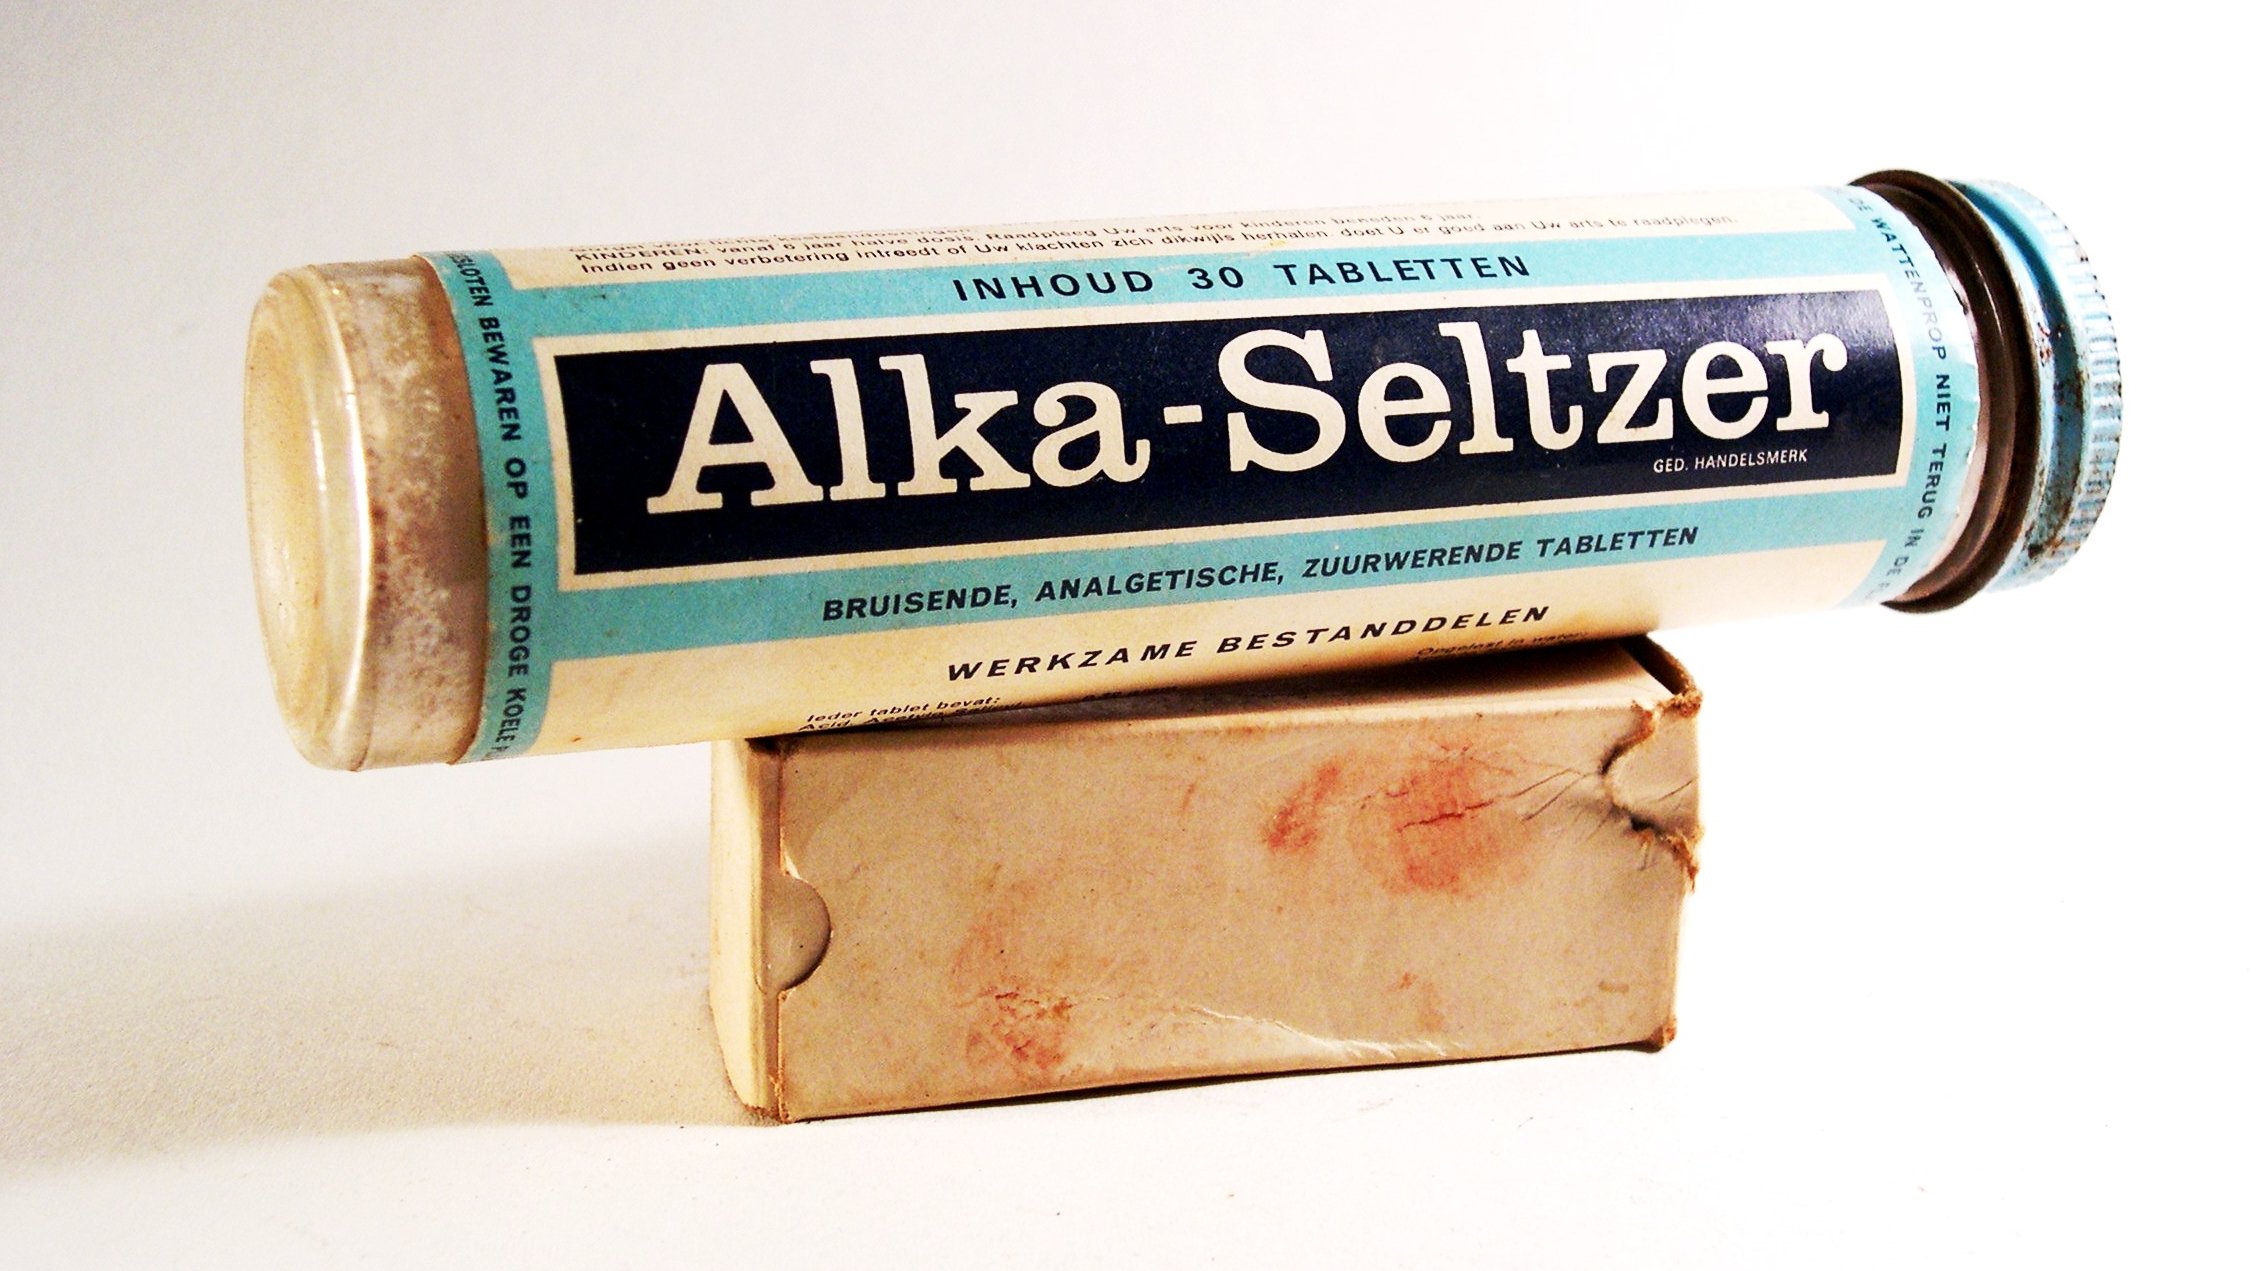 Heartburn and indigestion are no match for Alka Seltzer What catchy